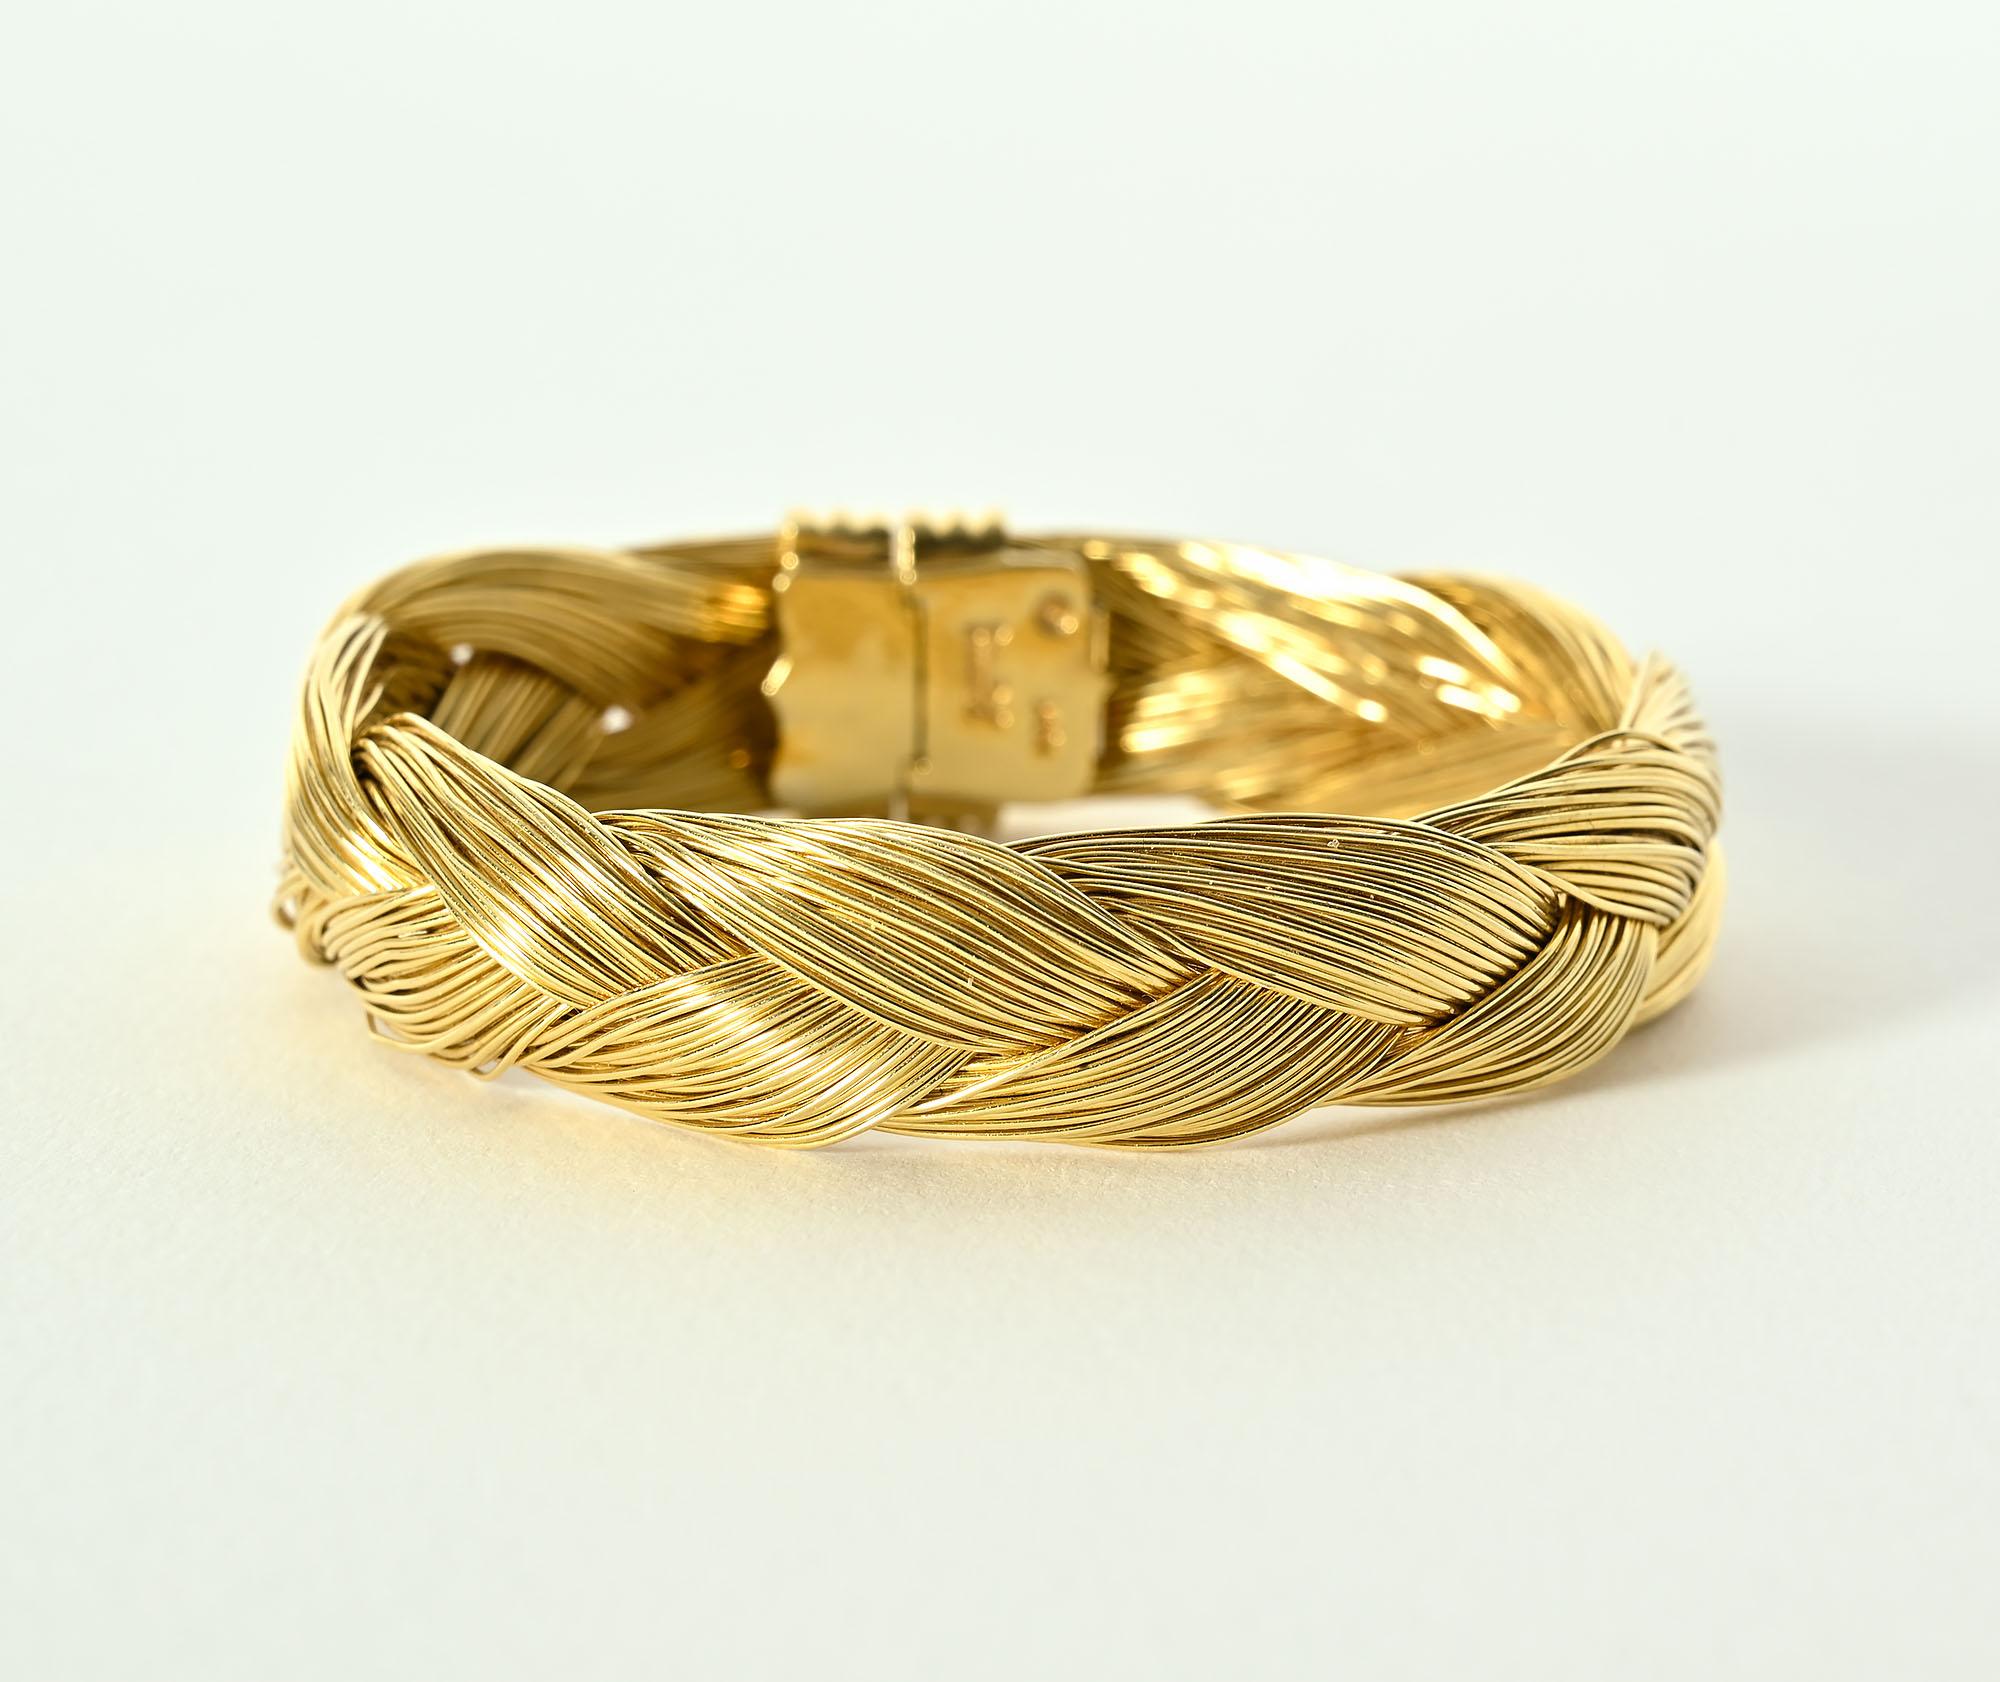 Braided 18 karat gold bracelet by American designer, Henry Dunay. The bracelet is half an inch tall.
When closed, the interior diameter is 2 1/8 inches.
The bracelet has an ornamental clasp that can be worn as the front or it can be concealed in the